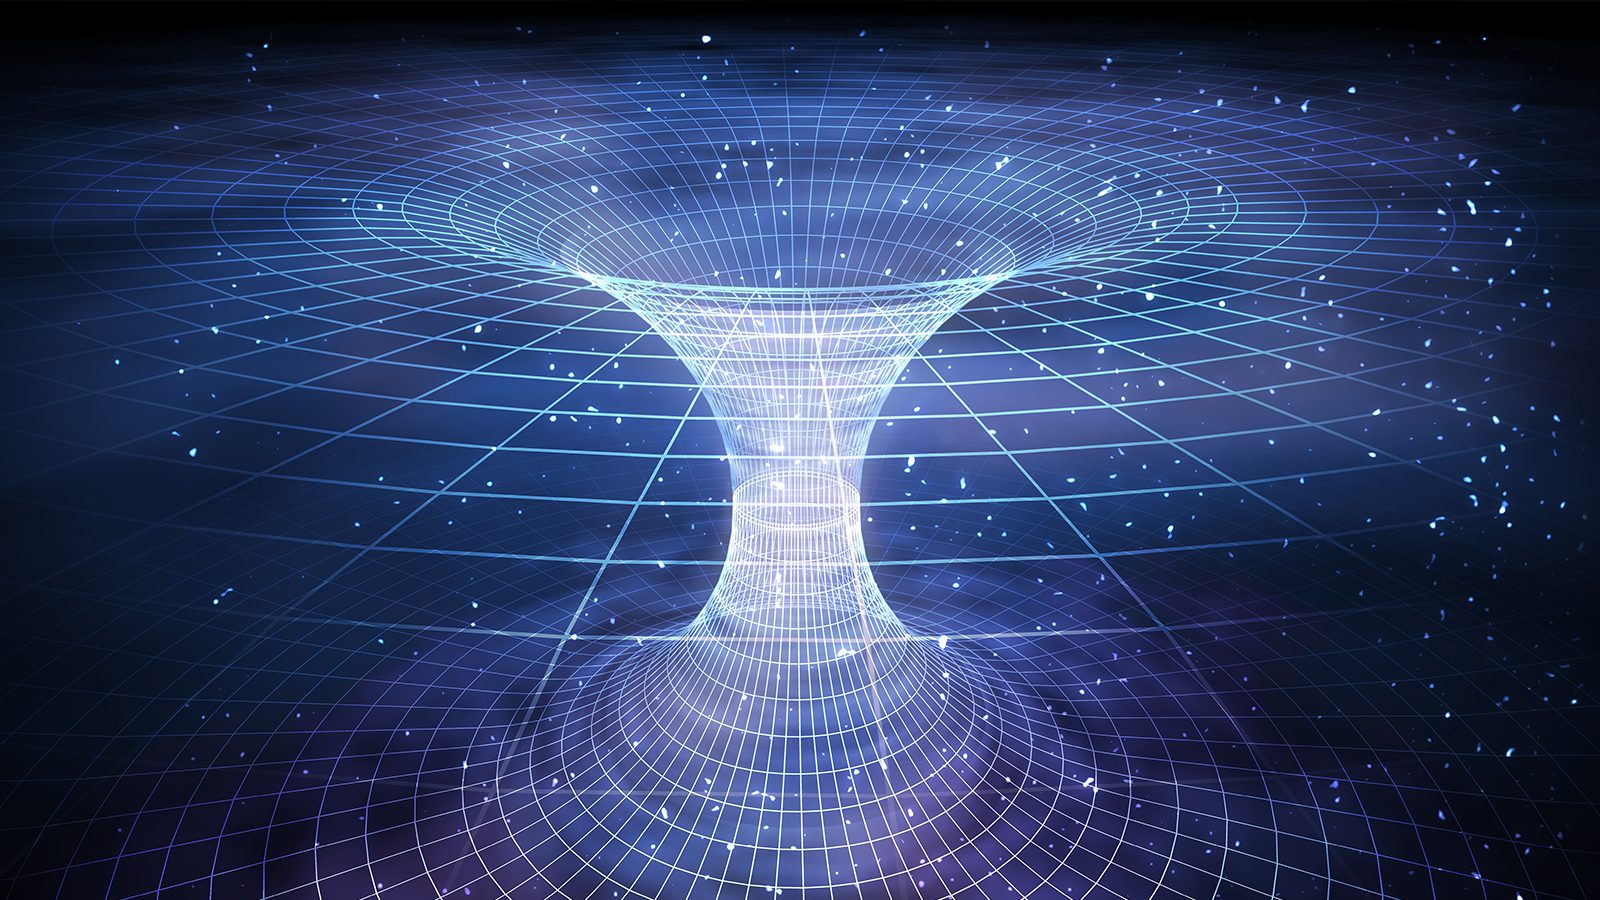 Physicists Explain How Block Universe Theory Reveals Time as an Illusion